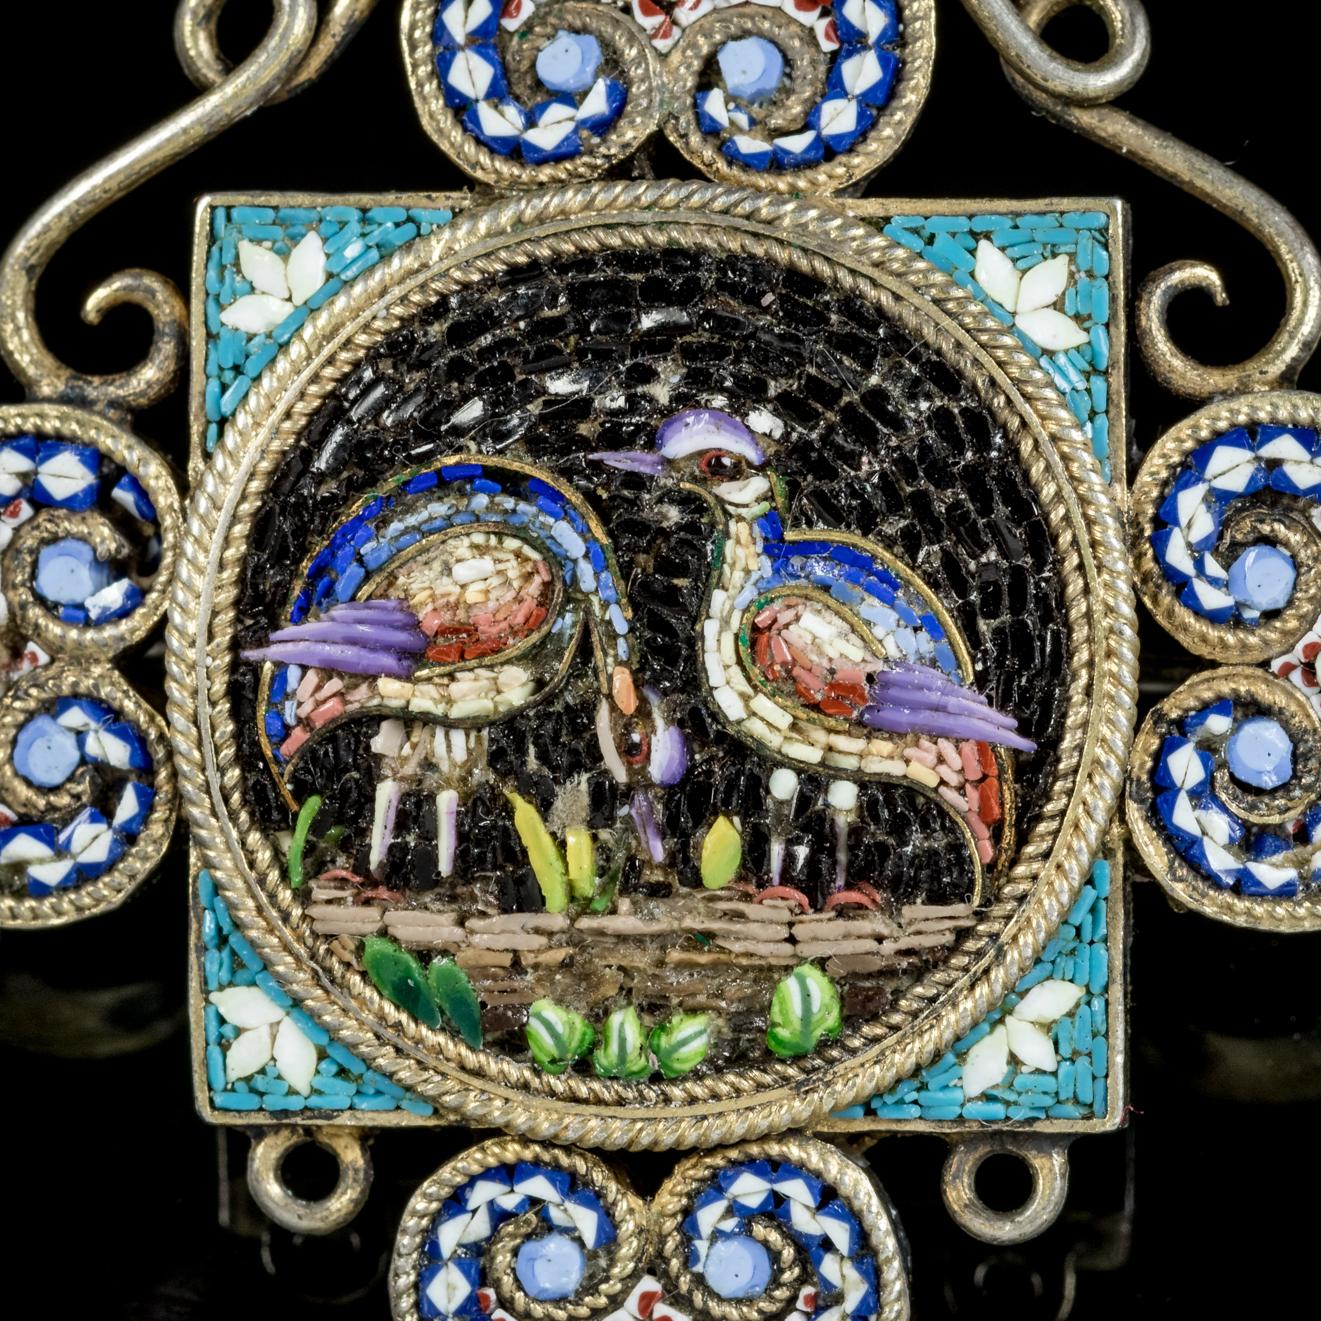 This beautiful antique Micro Mosaic bird pendant/ brooch is Victorian, Circa 1860.

The delightful piece features a central Mosaic made up of micro pieces creating a vibrant image of tall exotic birds feeding in the foliage. 

Victorian jewellery